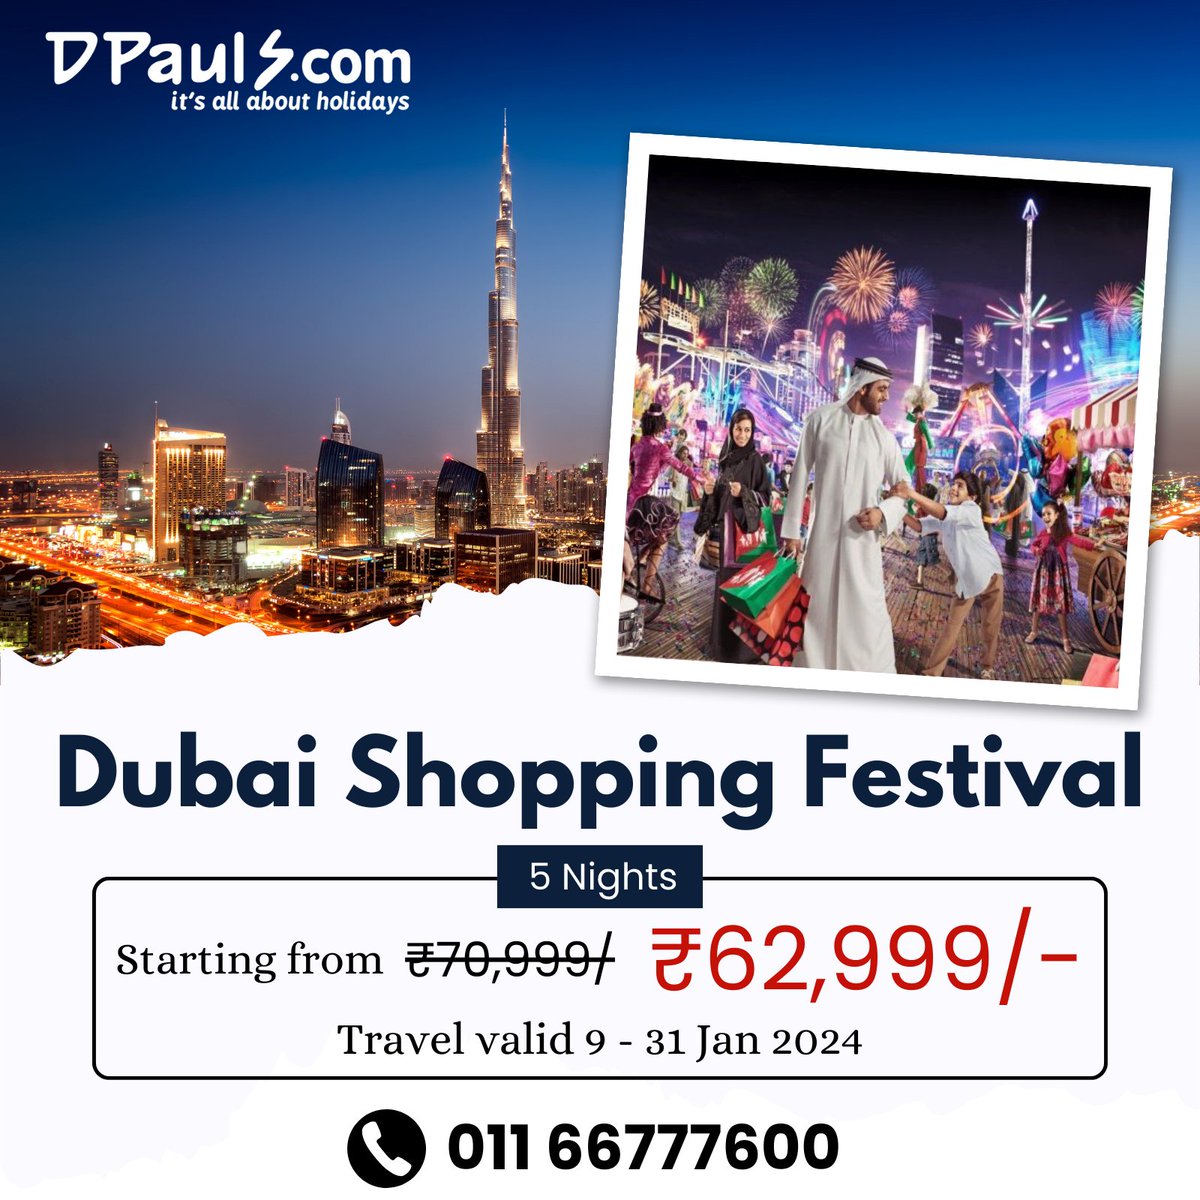 Dubai Shopping Festival! 5 Nights Package Starting from Rs.62,999/-pp
Incl:- Airfare, Stay, Breakfast, City Tour, Desert Safari, Etc.
For details, Call on 011-66777600
#DPauls_Travel #DubaiPackages #DubaishoppingFestival #ShoppingFestival #DubaiTour #DubaiTrip #DubaiHolidayTrip